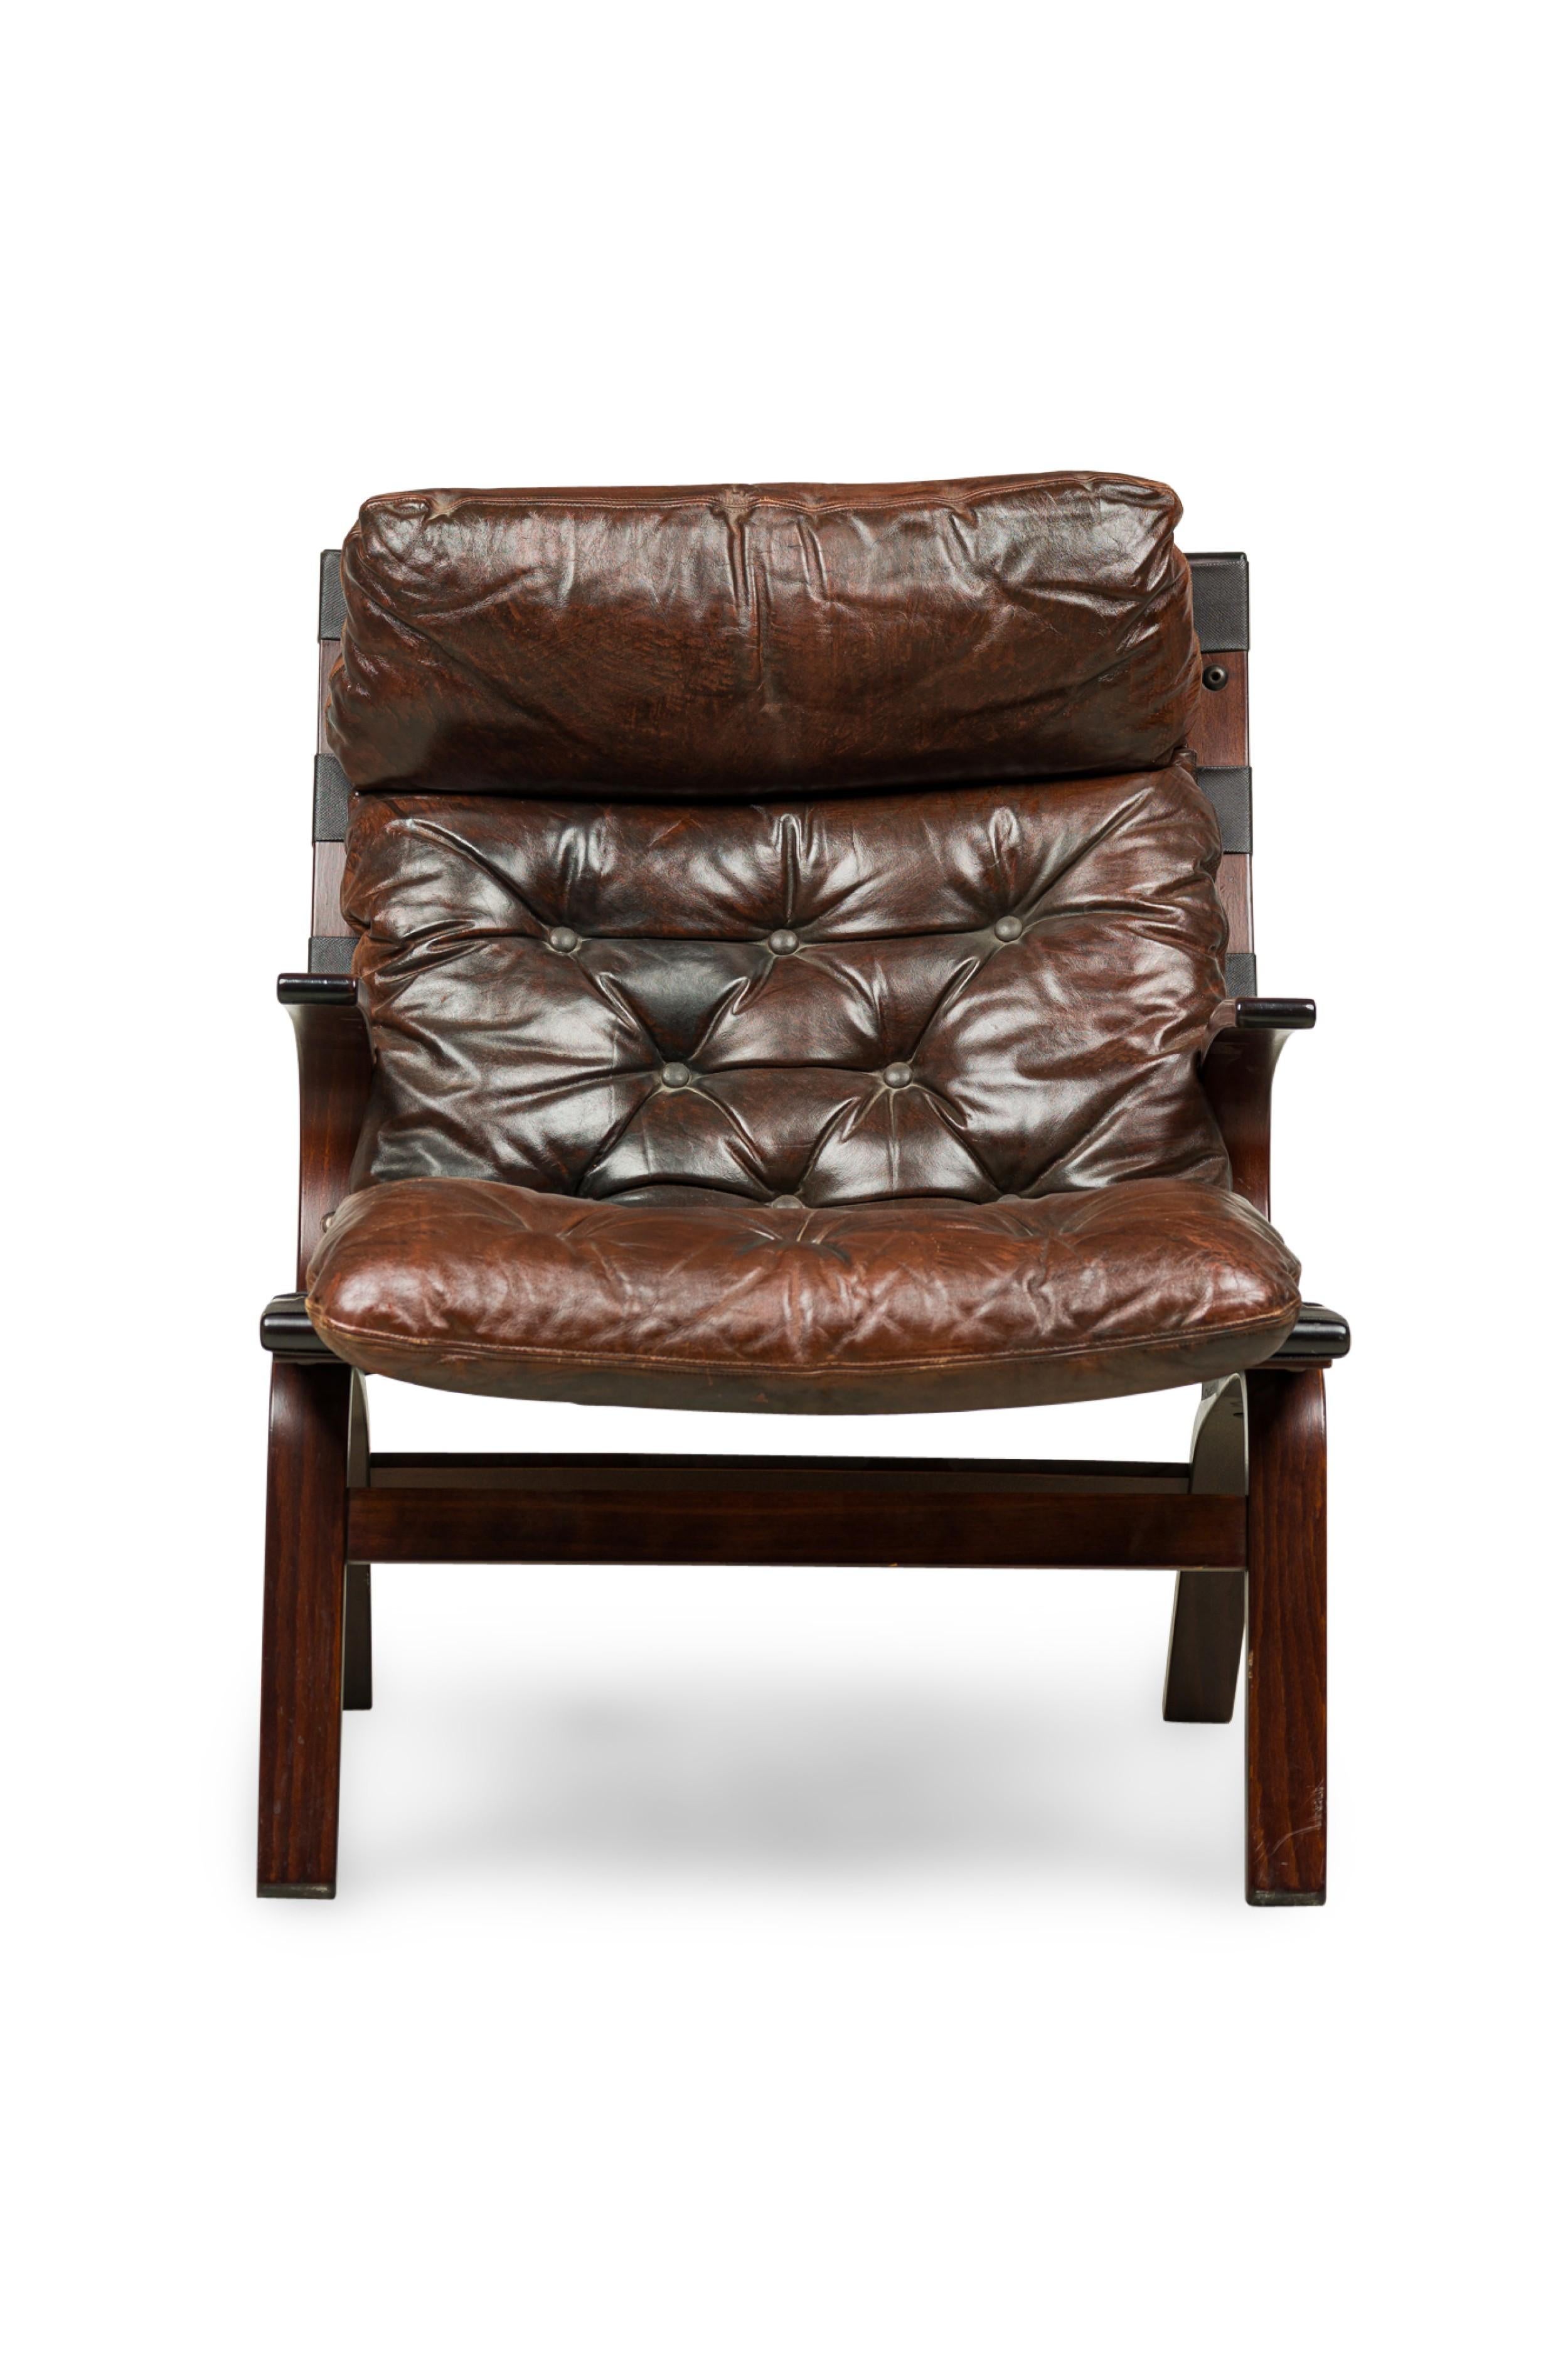 Scandinavian Mid-Century style bentwood armchair featuring curved arms and a brown leather button tufted cushion & headrest supported by a canvas sling back and seat, resting on four splayed legs with a glossy finish.
 

 Aging to leather
